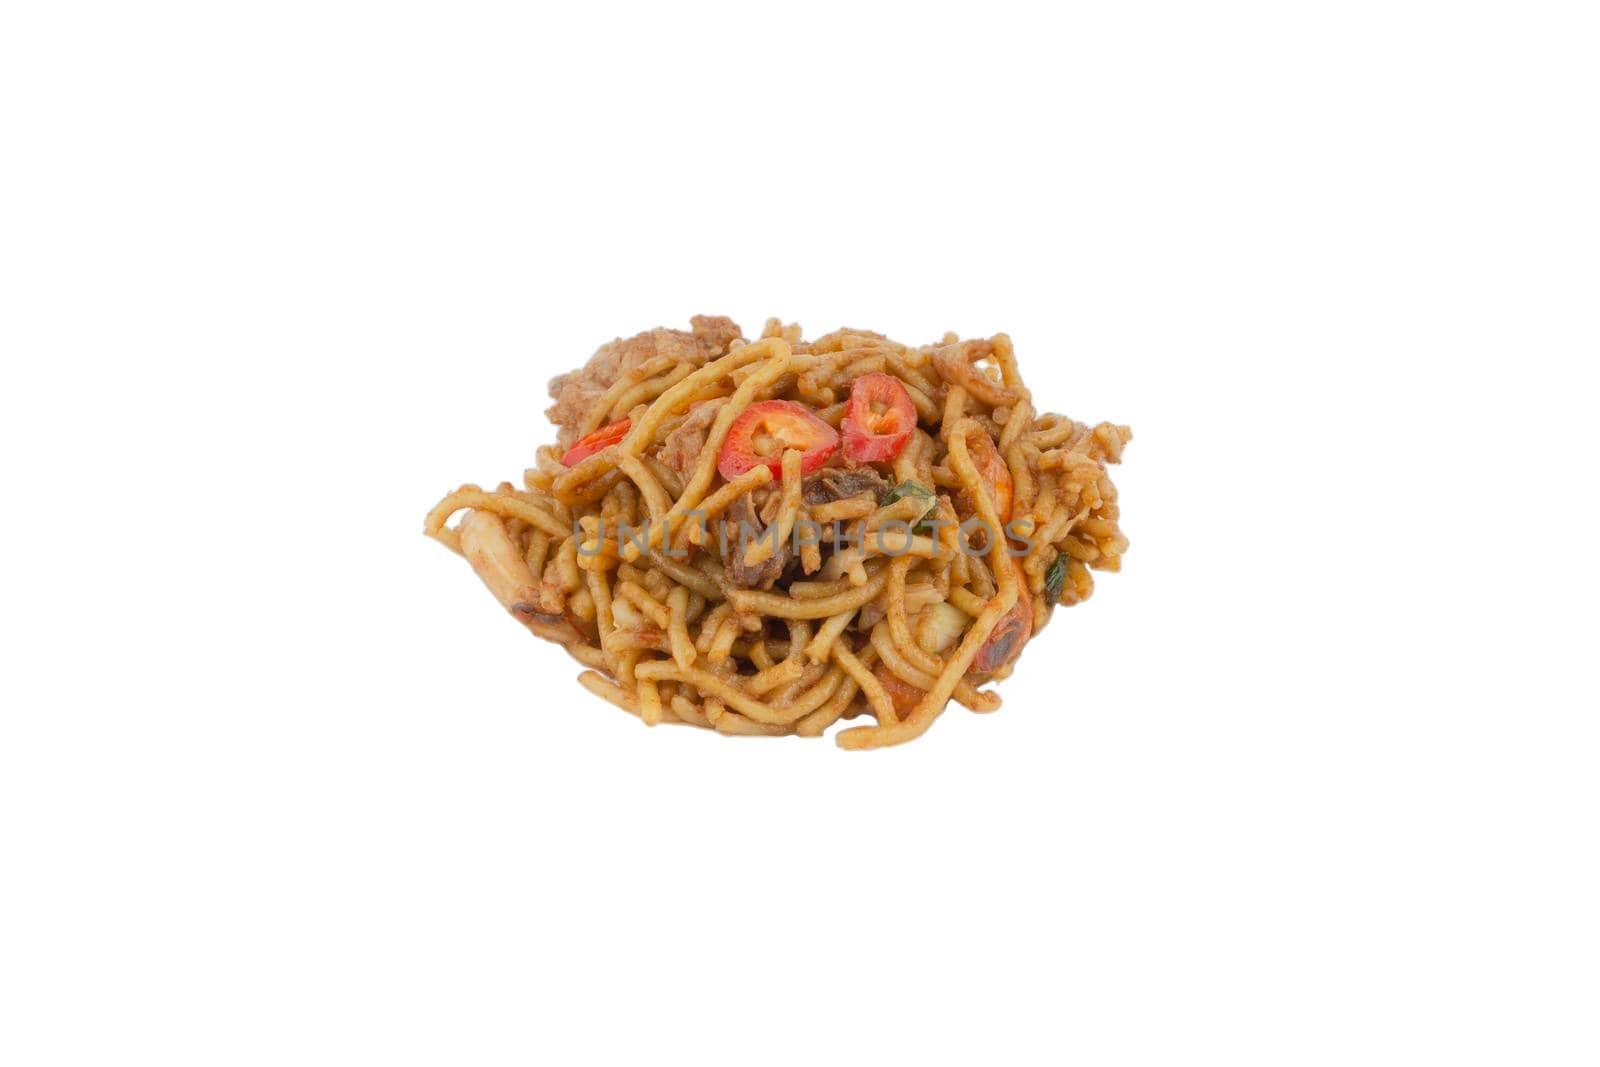 Fried noodles isolate on white background by silverwings